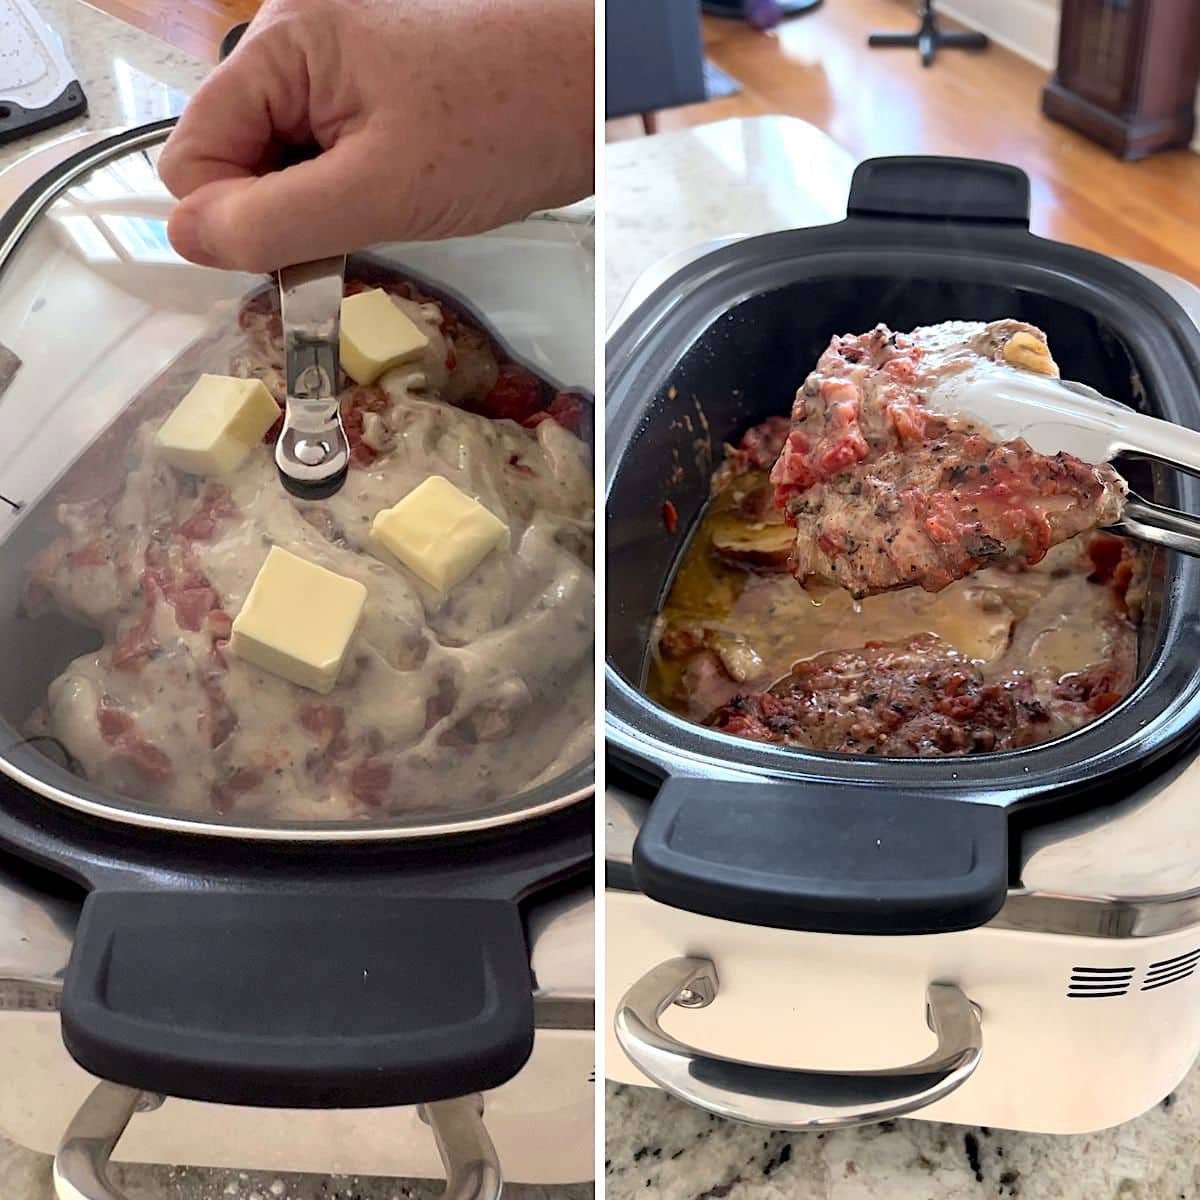 Placing the slow cooker lid on the pot. Removing the pork chops from the slow cooker after cooking.